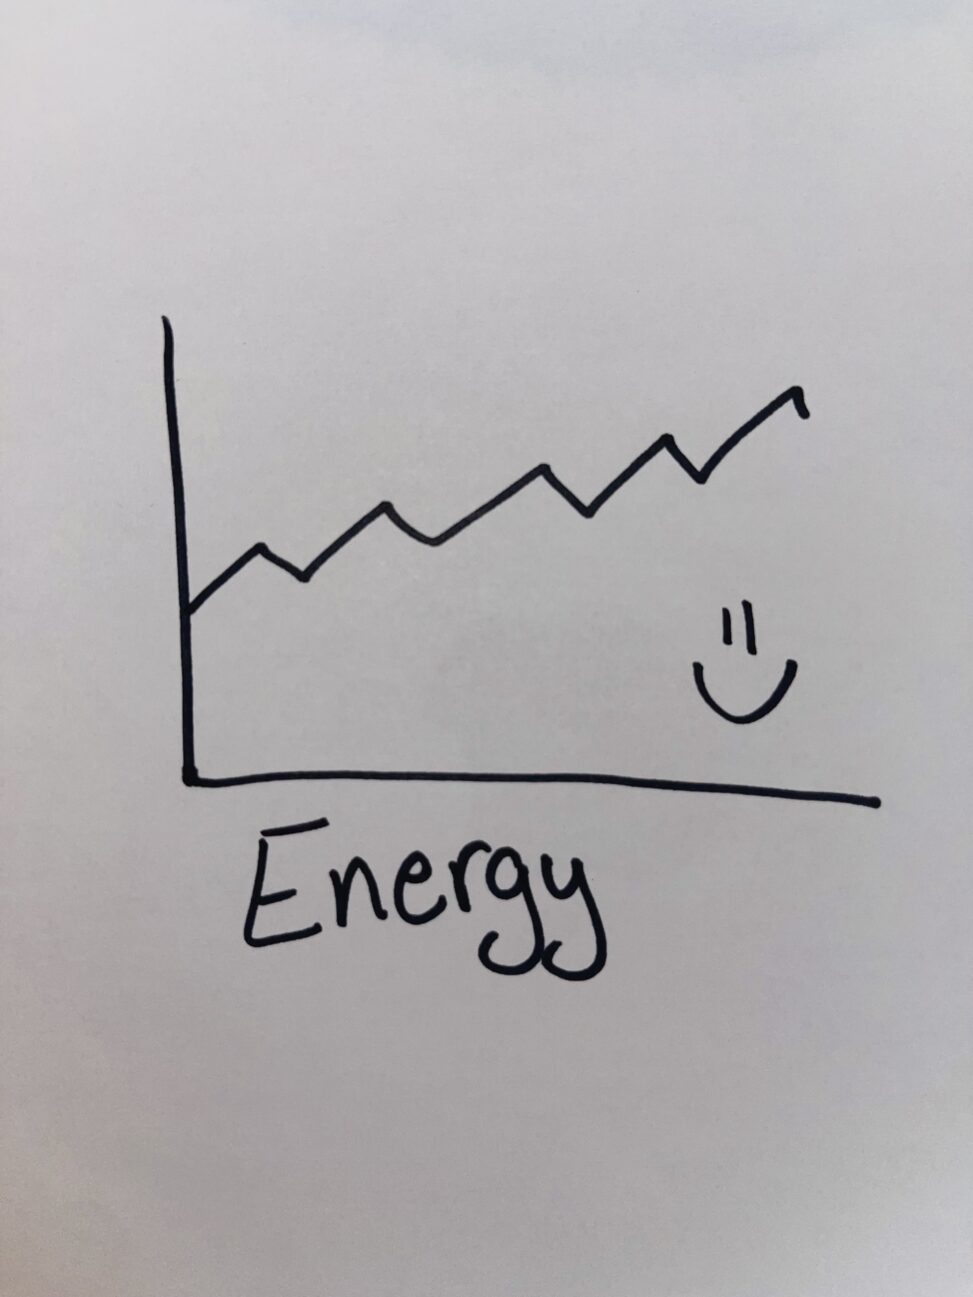 Graph showing energy throughout the day.